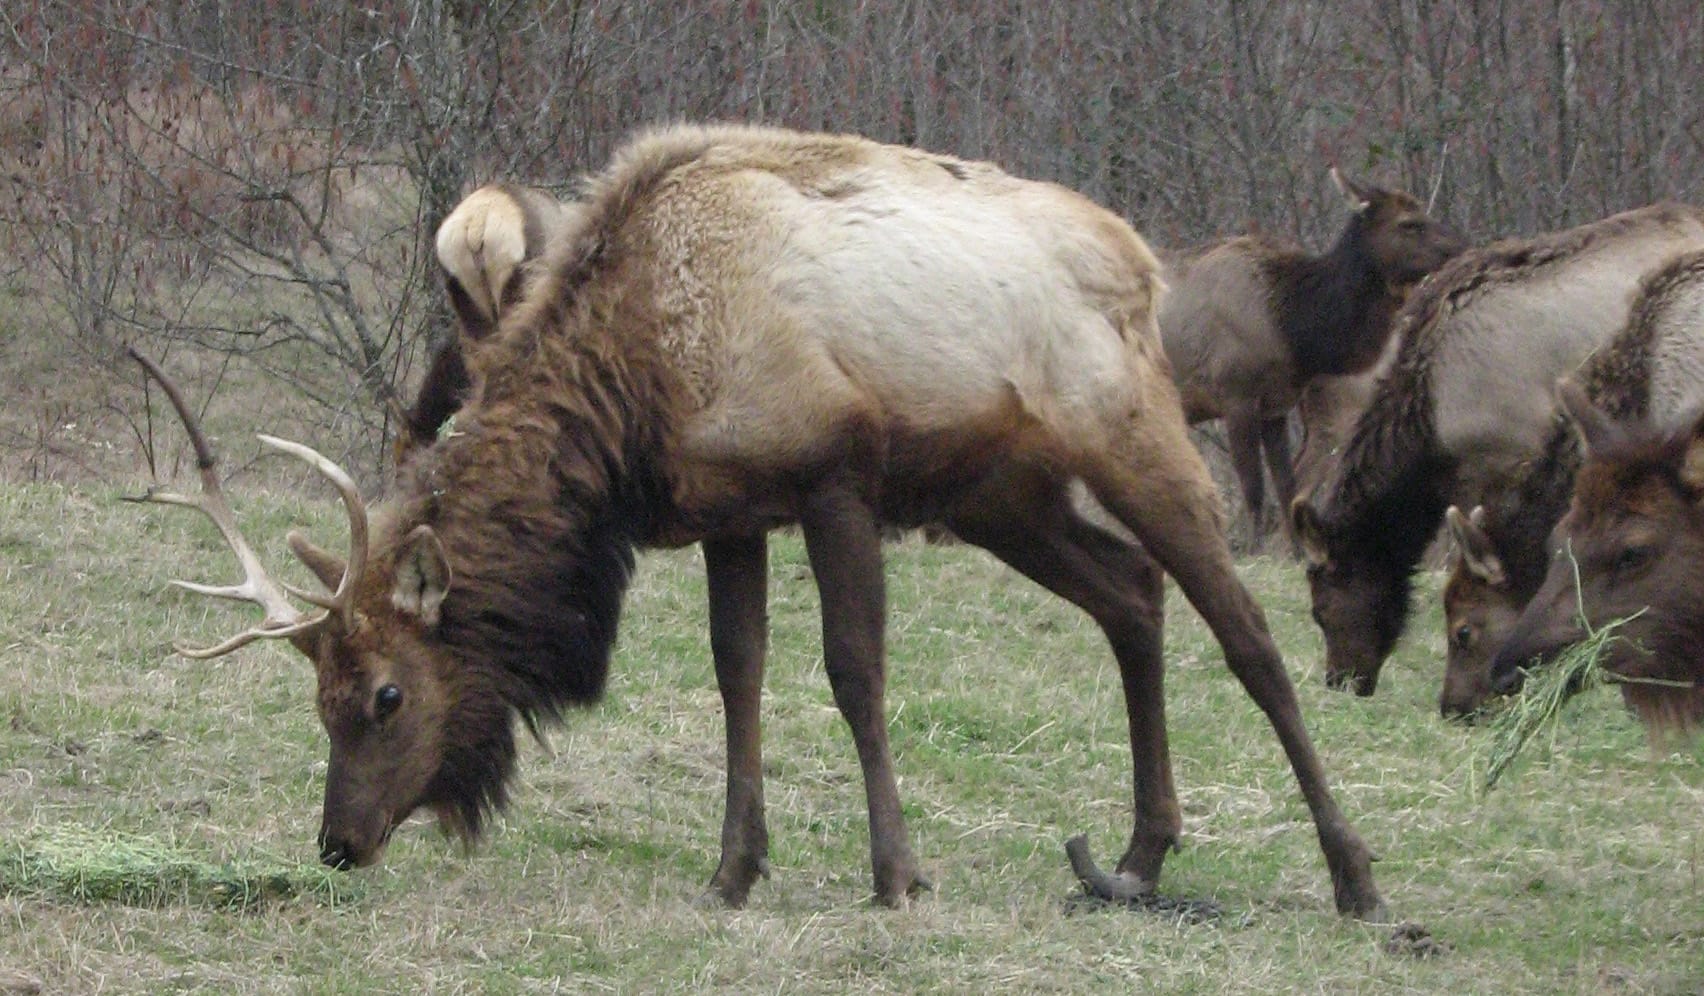 Elk hoof disease started in the Cowlitz River valley and has been spreading.